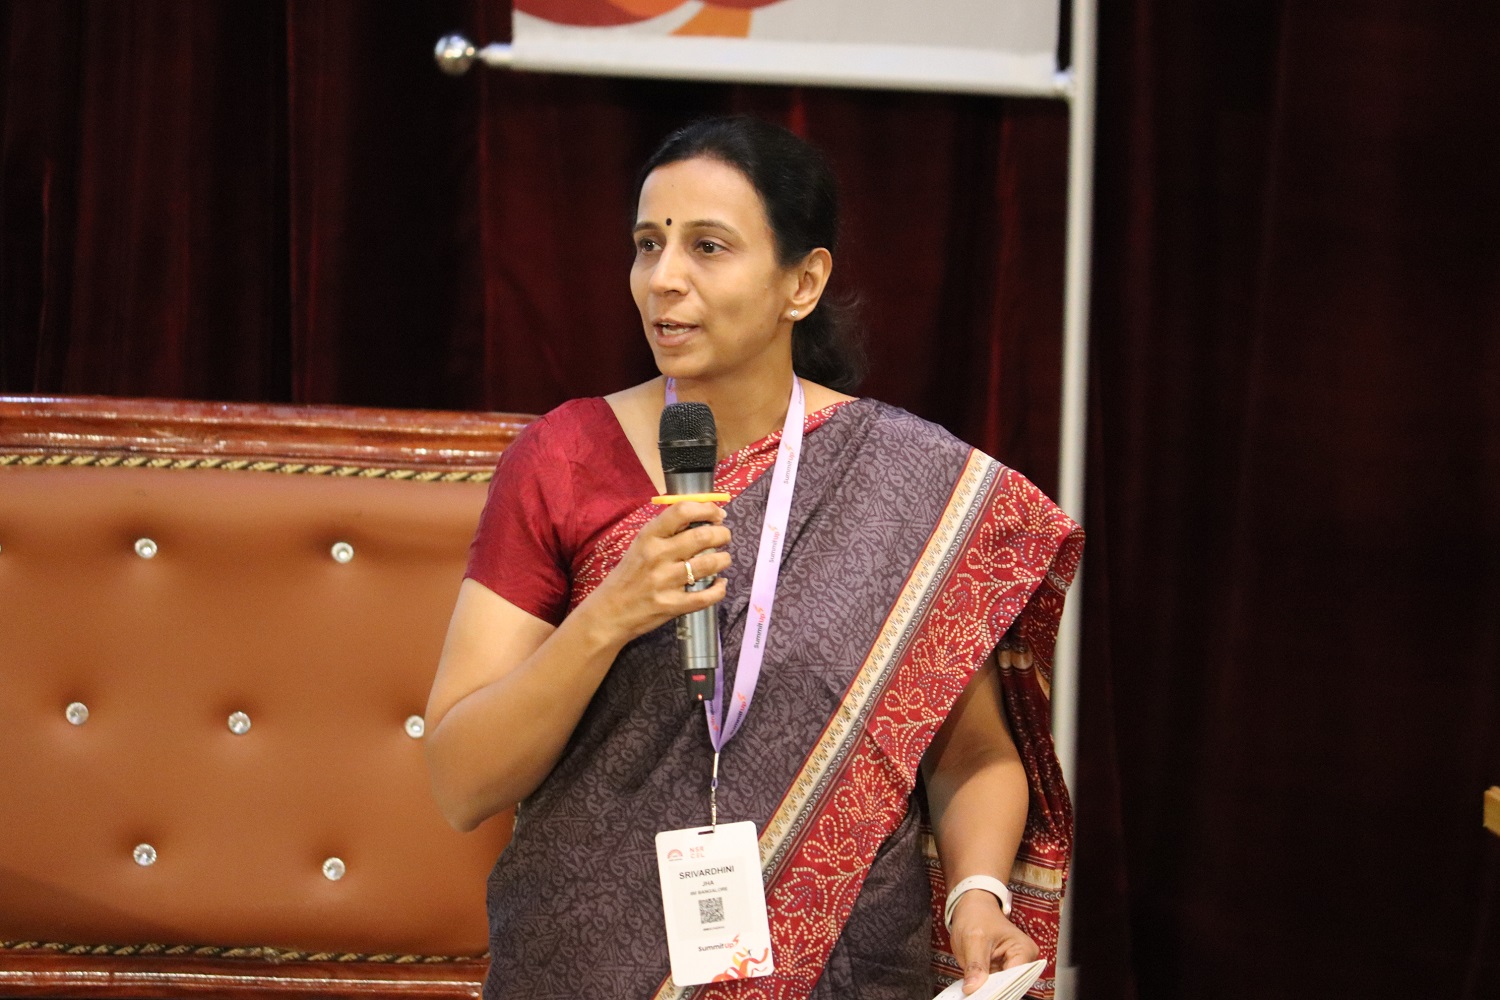 Prof. Srivardhini K Jha, Chairperson, NSRCEL, IIMB, speaks at the day 2 of the conference.